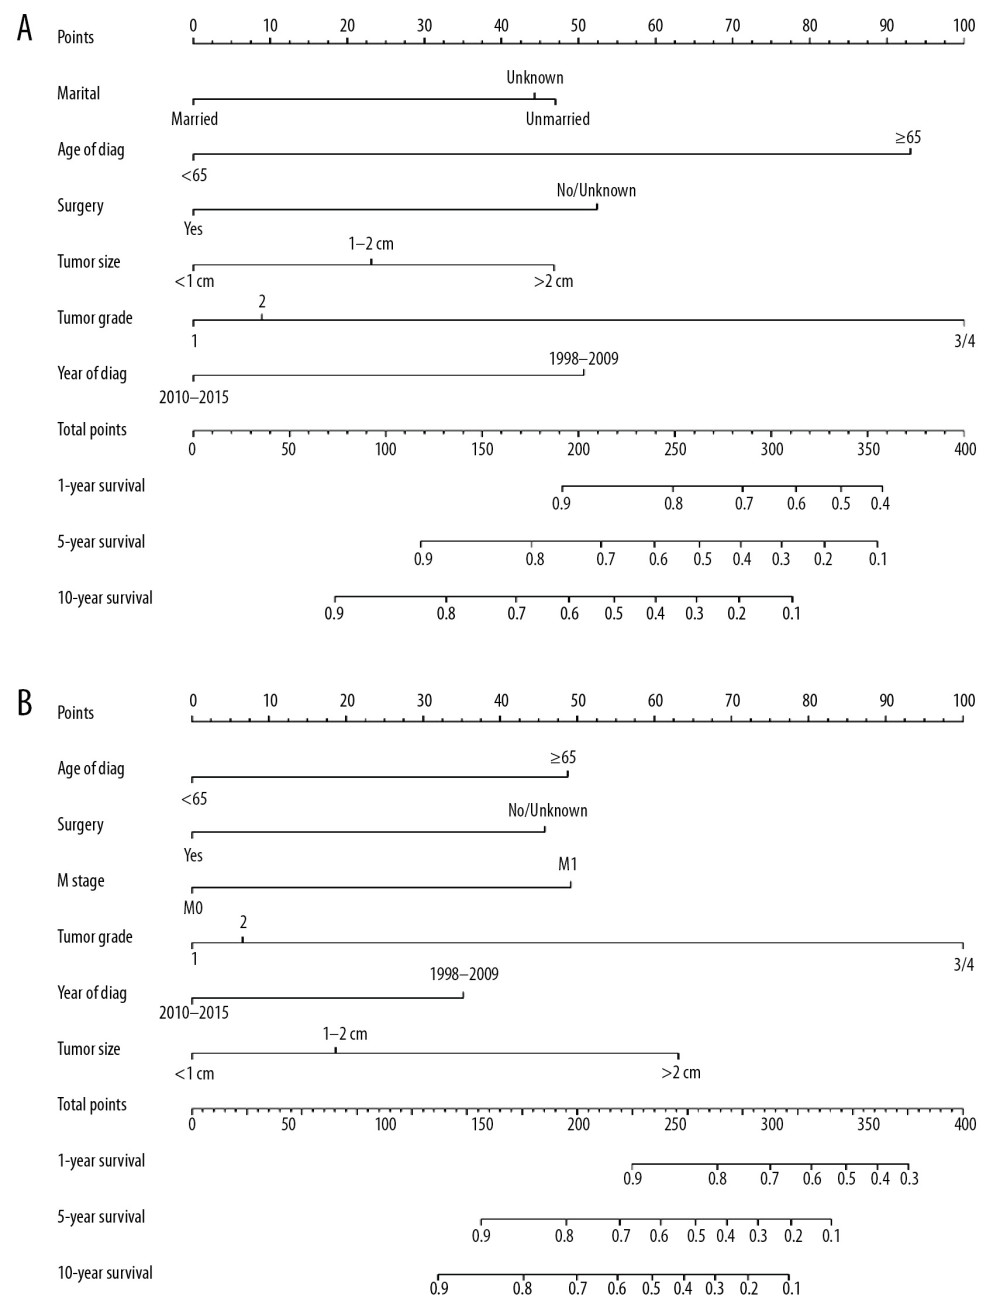 Nomograms predicting 1-, 5-, and 10-year overall survival (A) and cancer-specific survival (B) of patients with PGINHL.